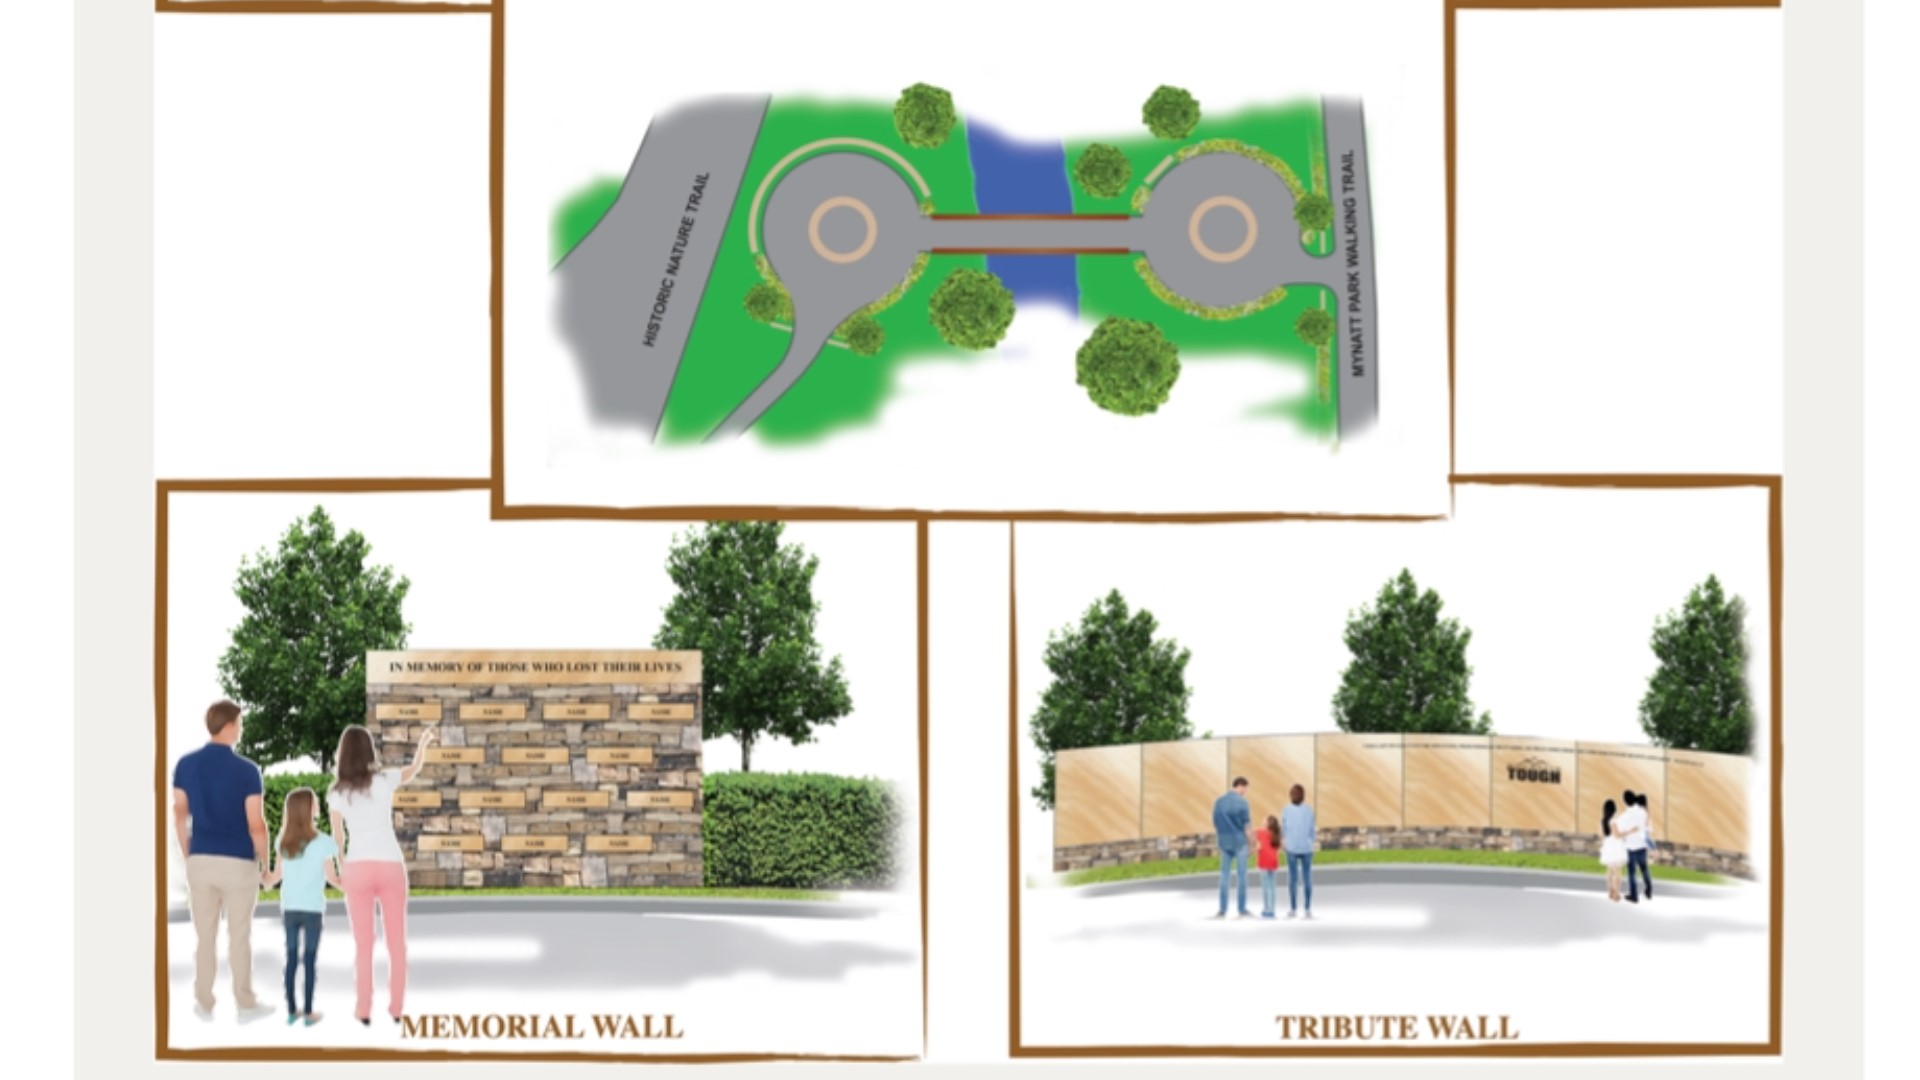 The Gatlinburg City Commission approve a Contract with Whaley Construction for the Chimney Tops II Wildfires Memorial, which will be located at Mynatt Park.